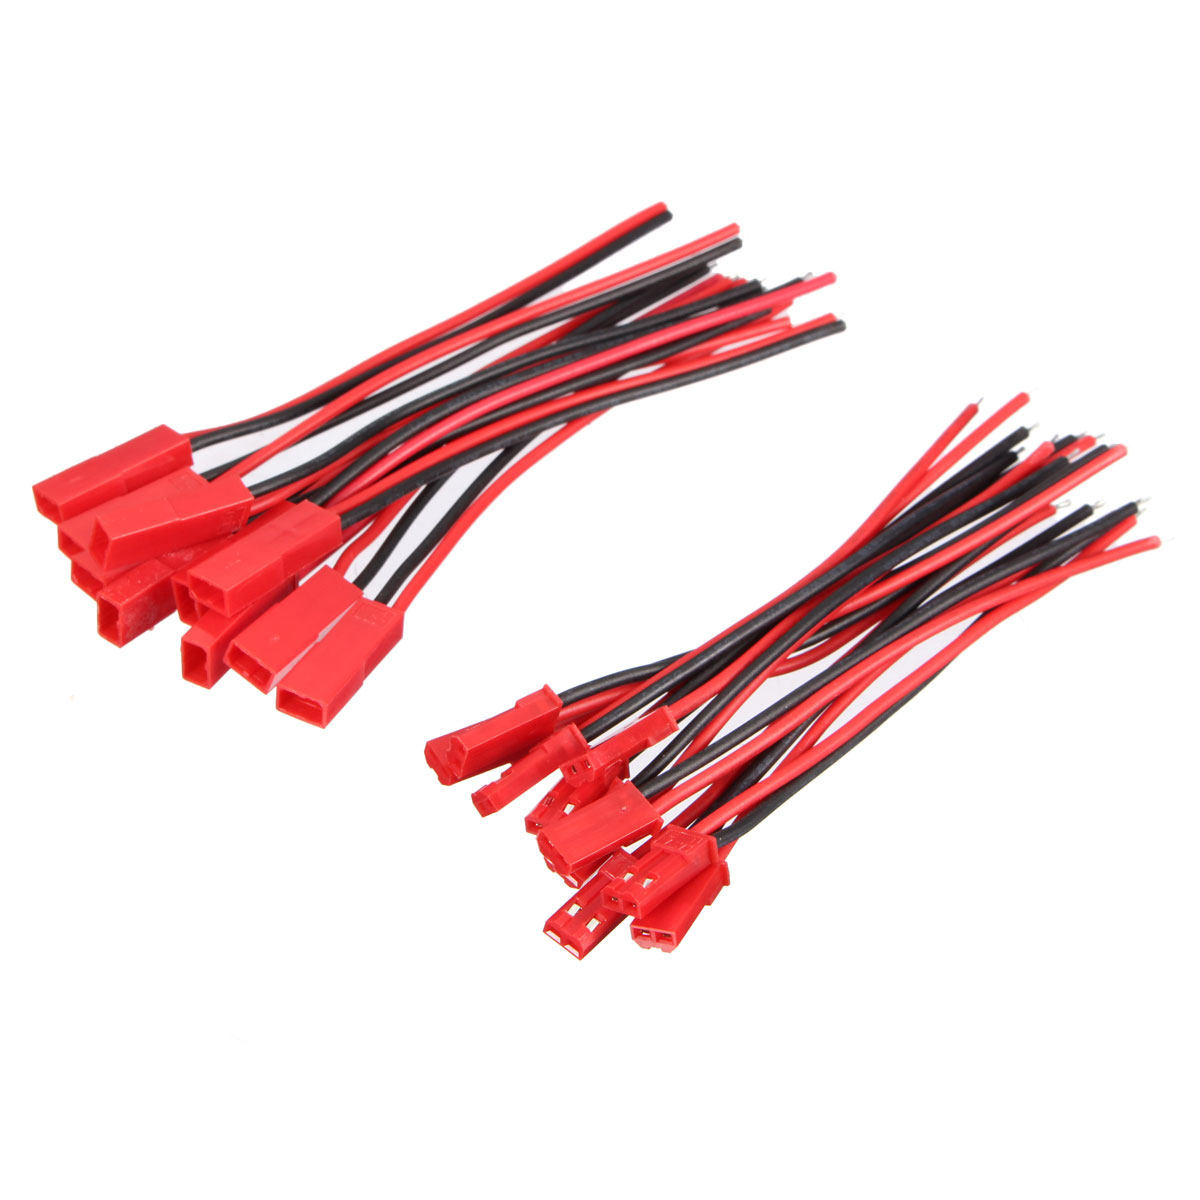 Excellwayreg-10-Pairs-2-Pins-JST-Male--Female-Connectors-Plug-Cable-Wire-Line-110mm-Red-1268119-2